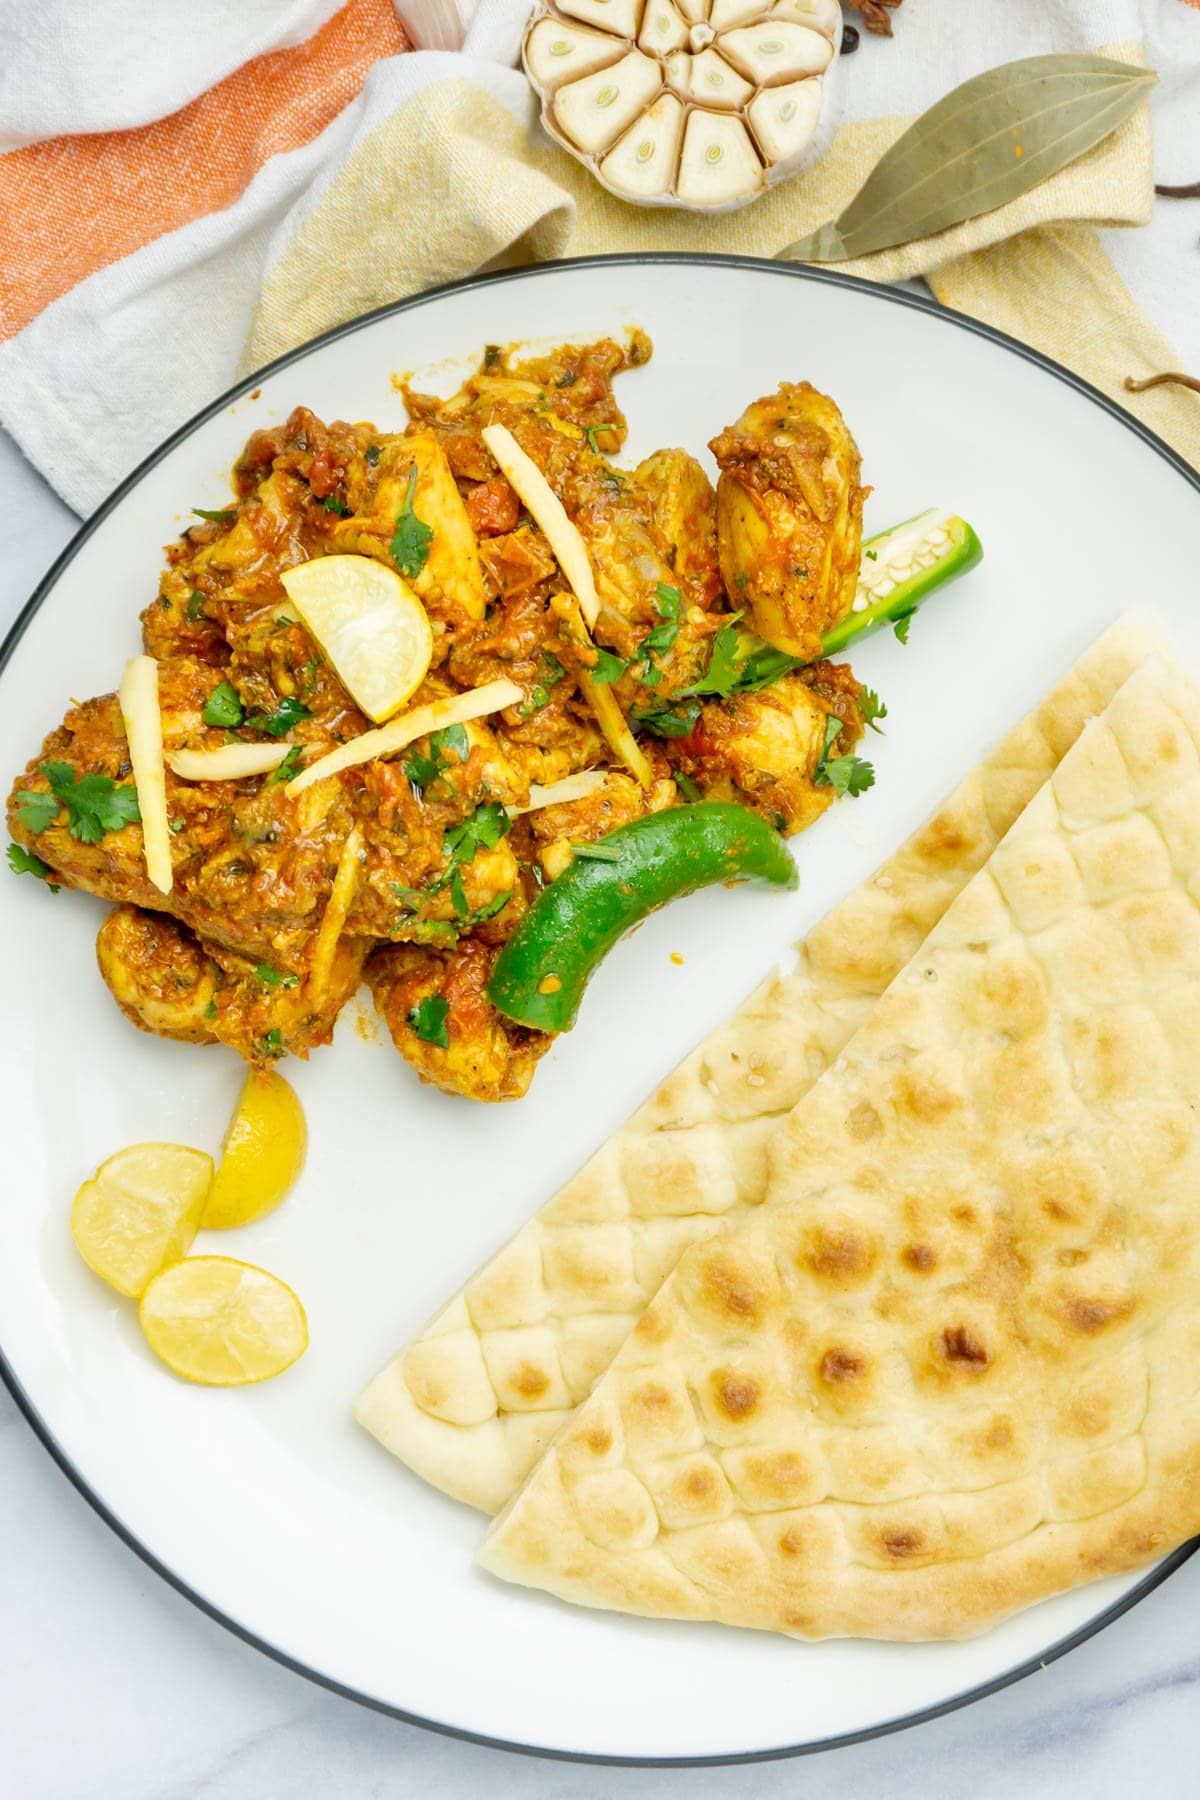 Chicken Karahi with naan in a plate